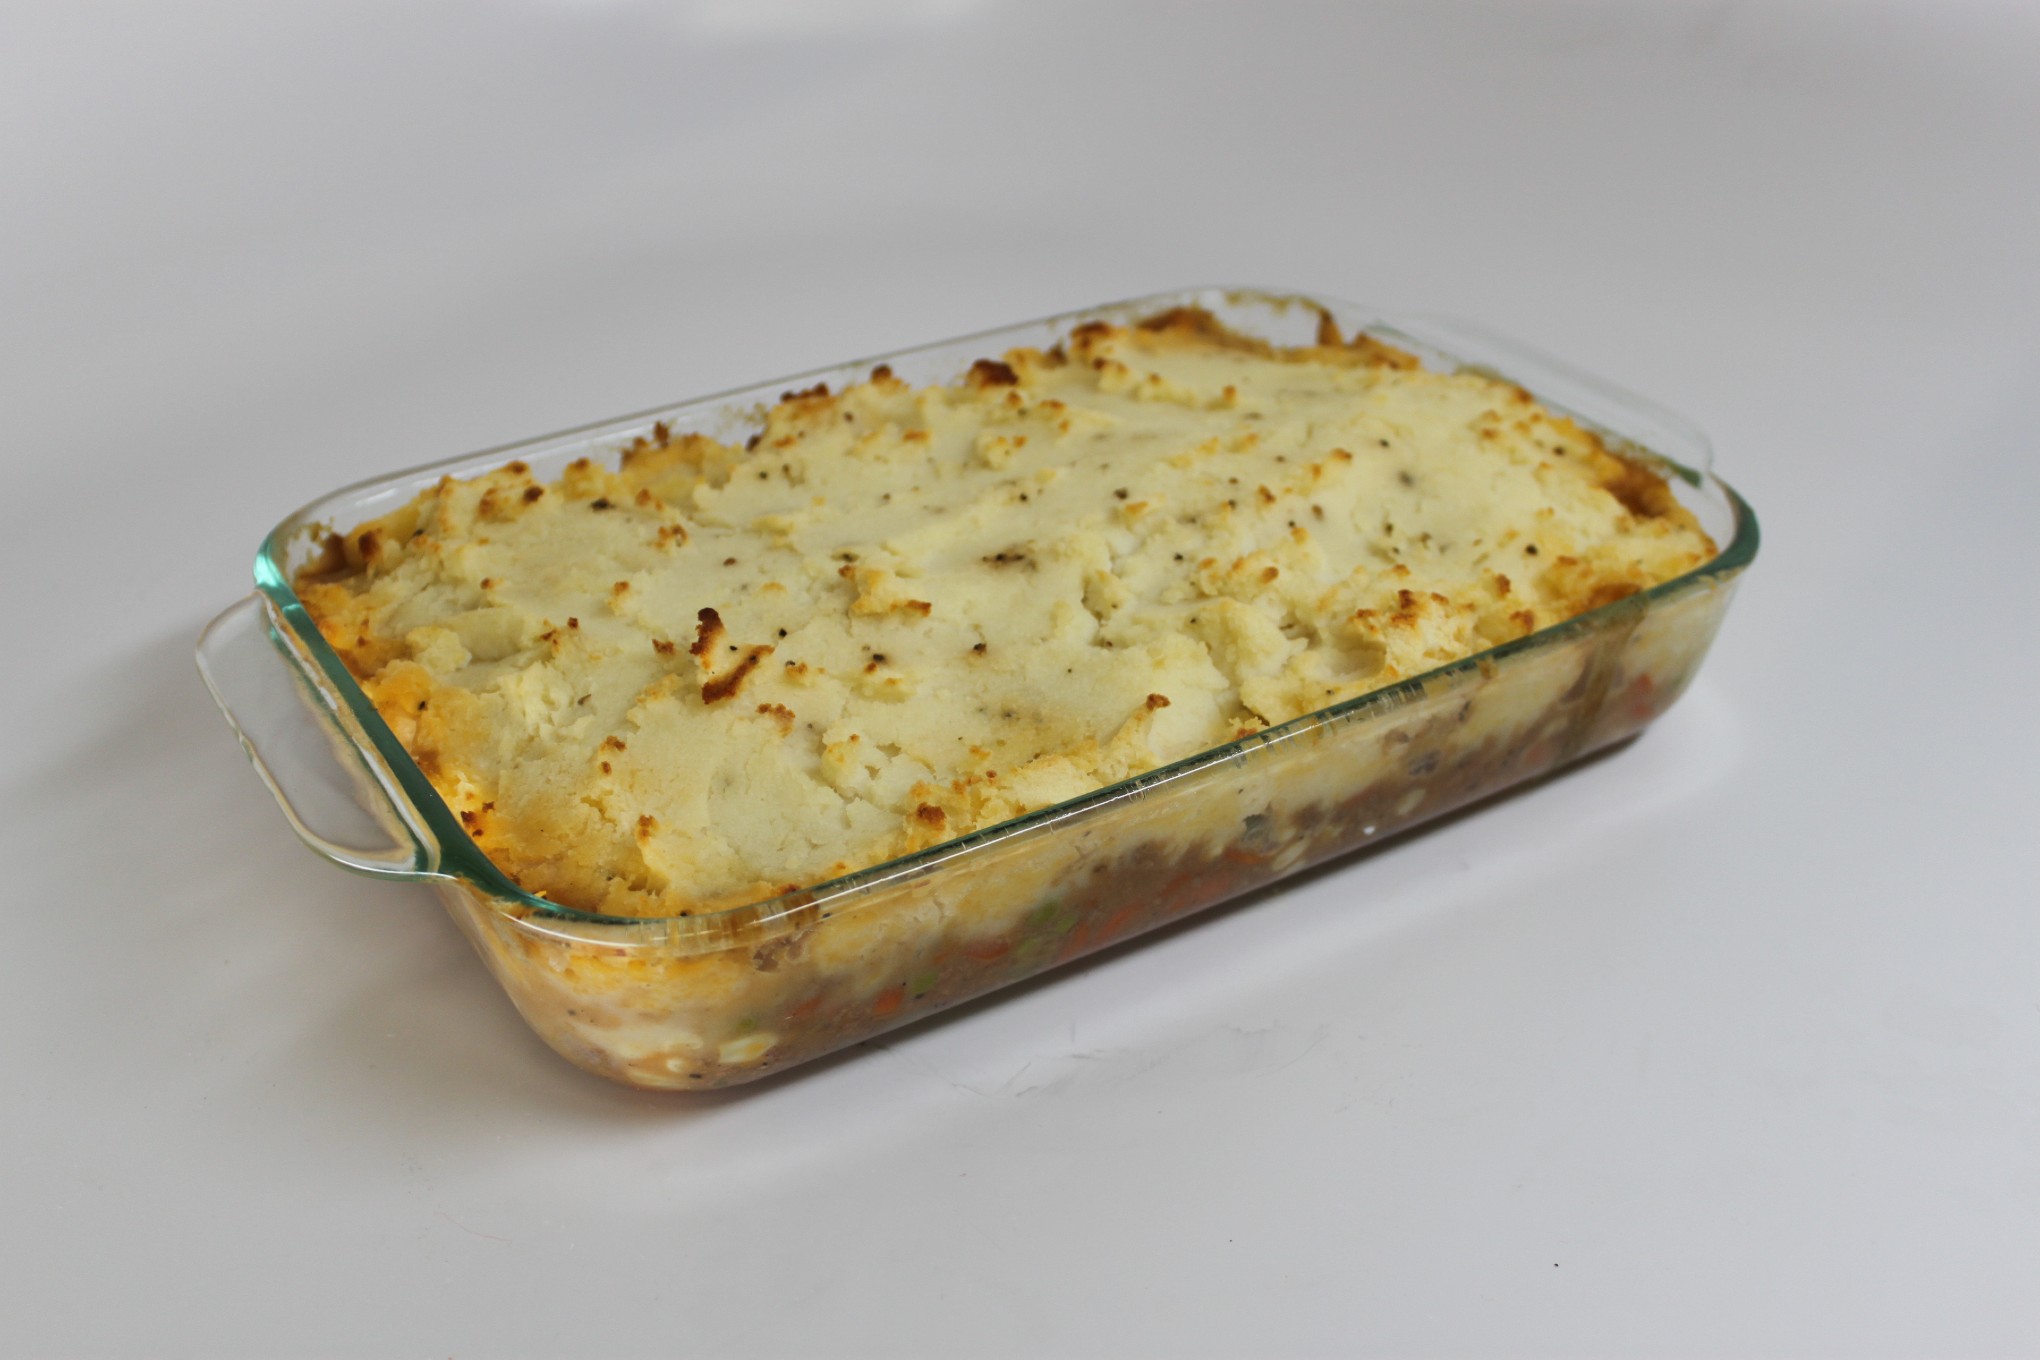 Shepherd's pie in a glass baking dish on the set of Good Eats.